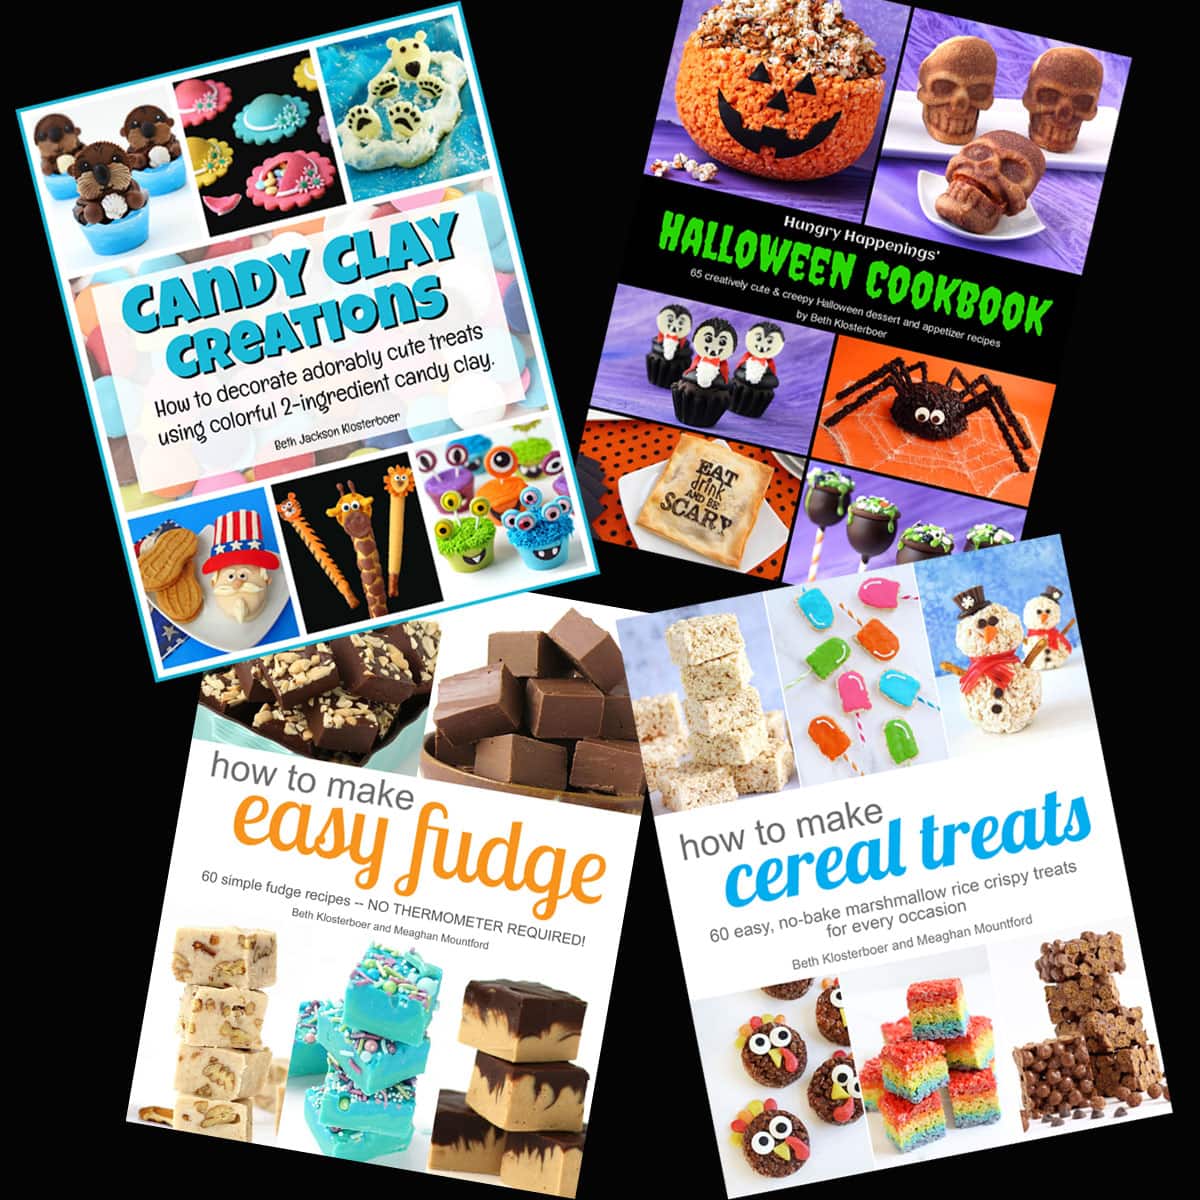 Cookbooks by Beth Jackson Klosterboer: Candy Clay Creations, Hungry Happenings' Halloween Cookbook, How To Make Easy Fudge, and How To Make Cereal Treats